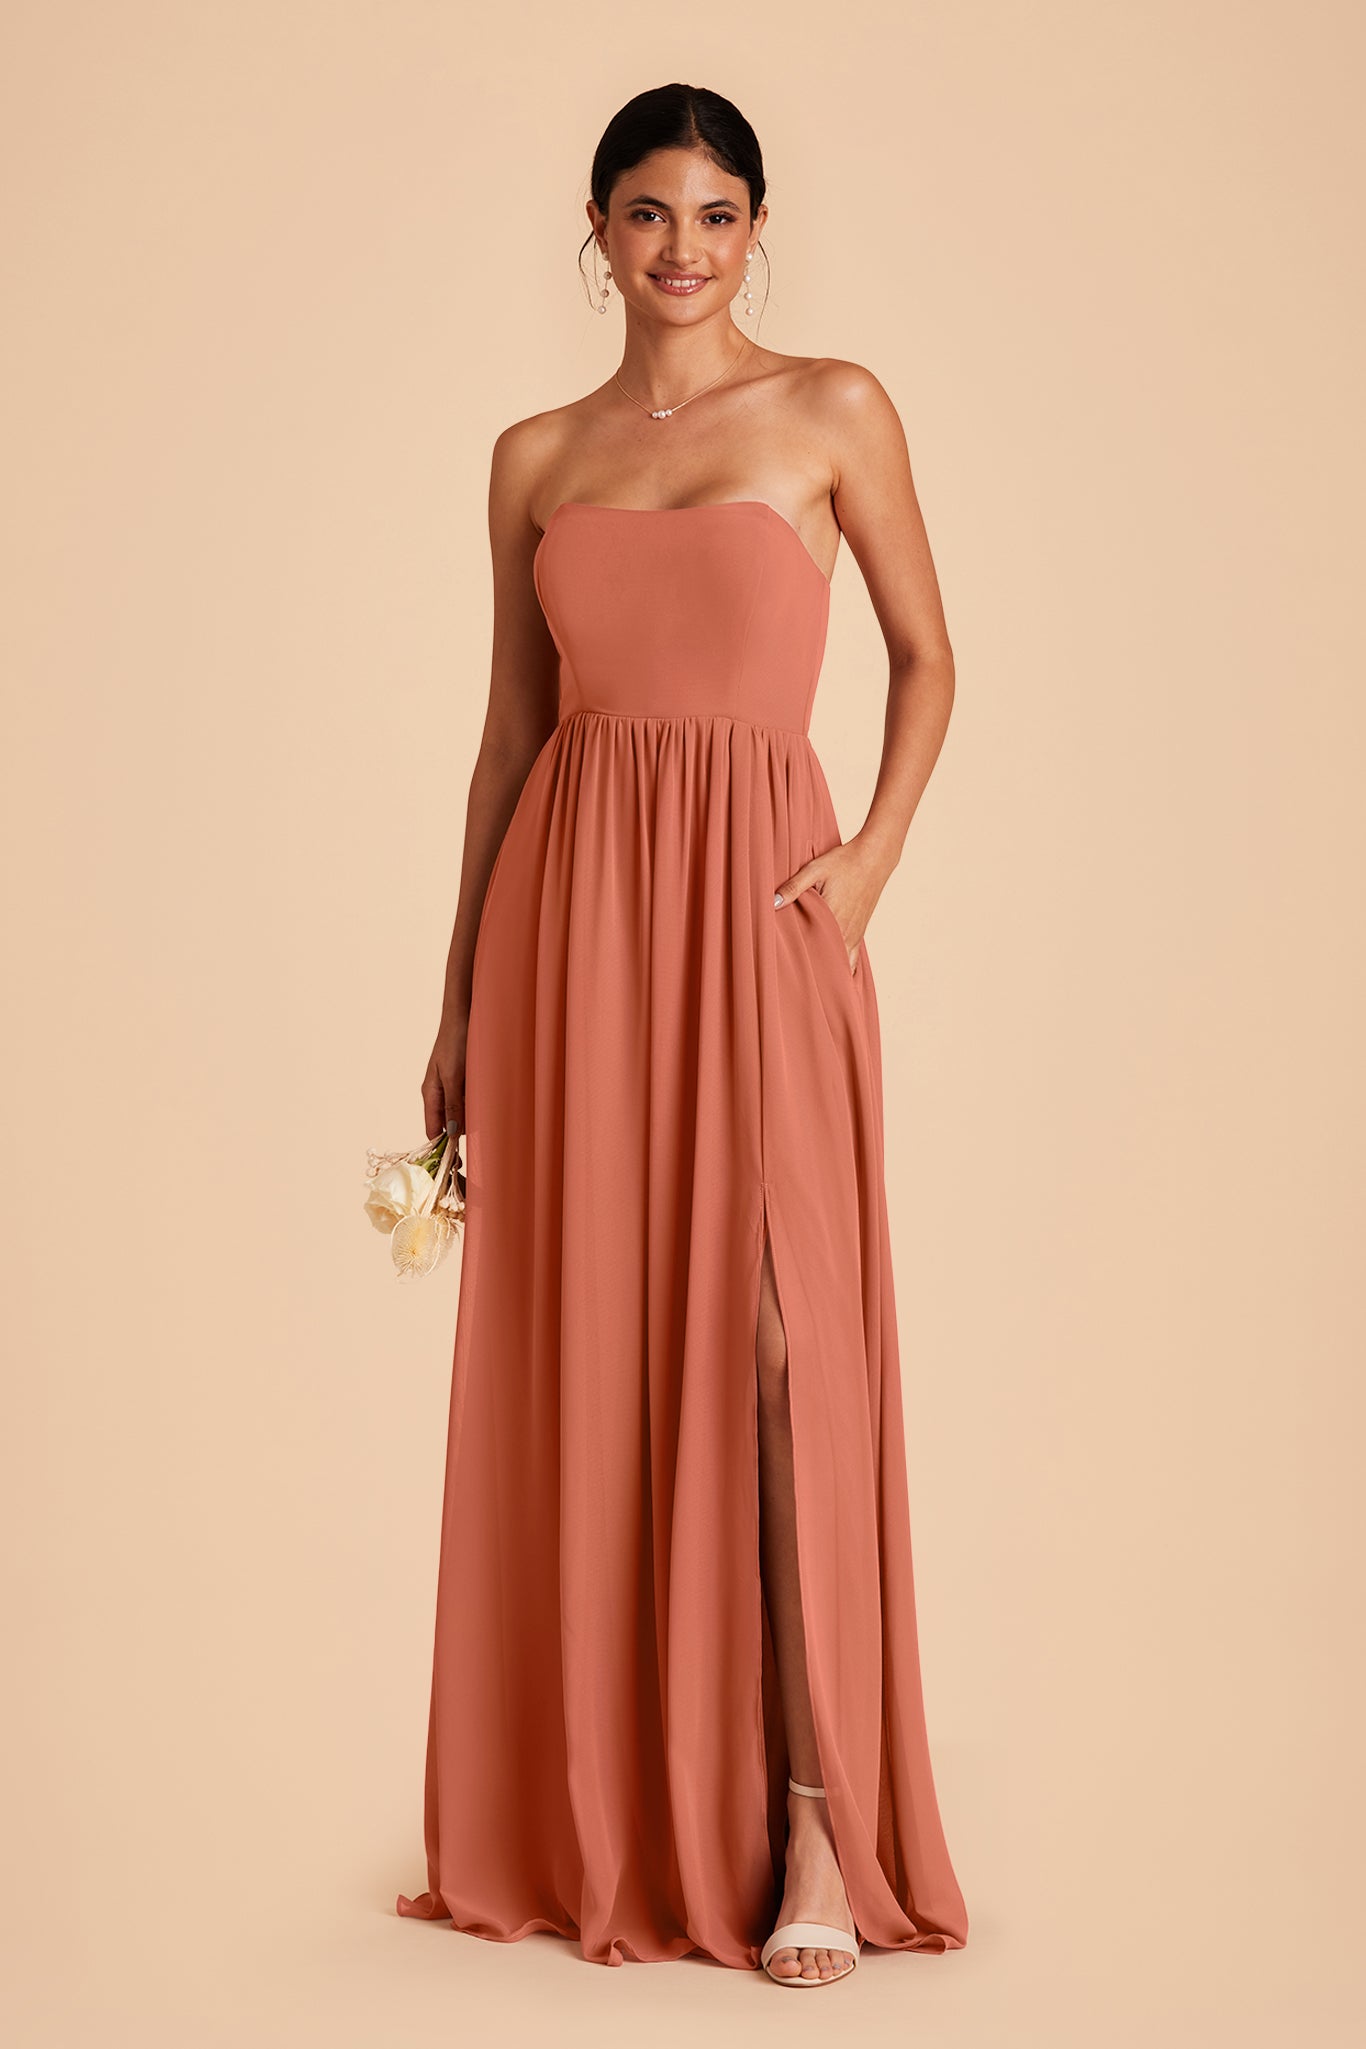 August bridesmaid dress with slit in terracotta chiffon by Birdy Grey, front view